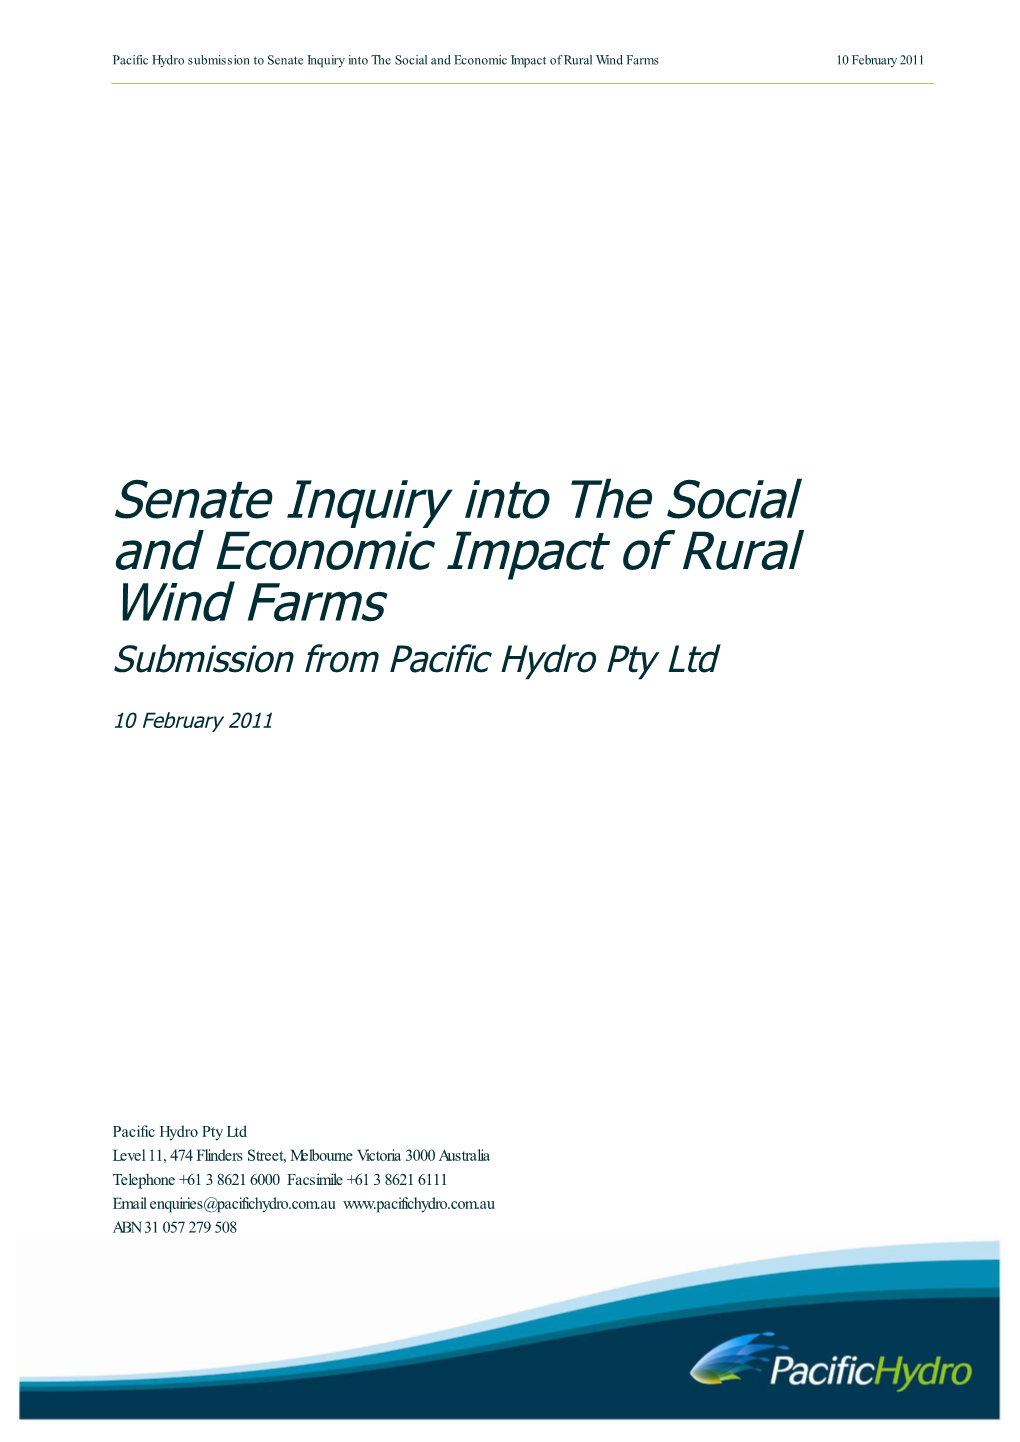 Senate Inquiry Into the Social and Economic Impact of Rural Wind Farms 10 February 2011